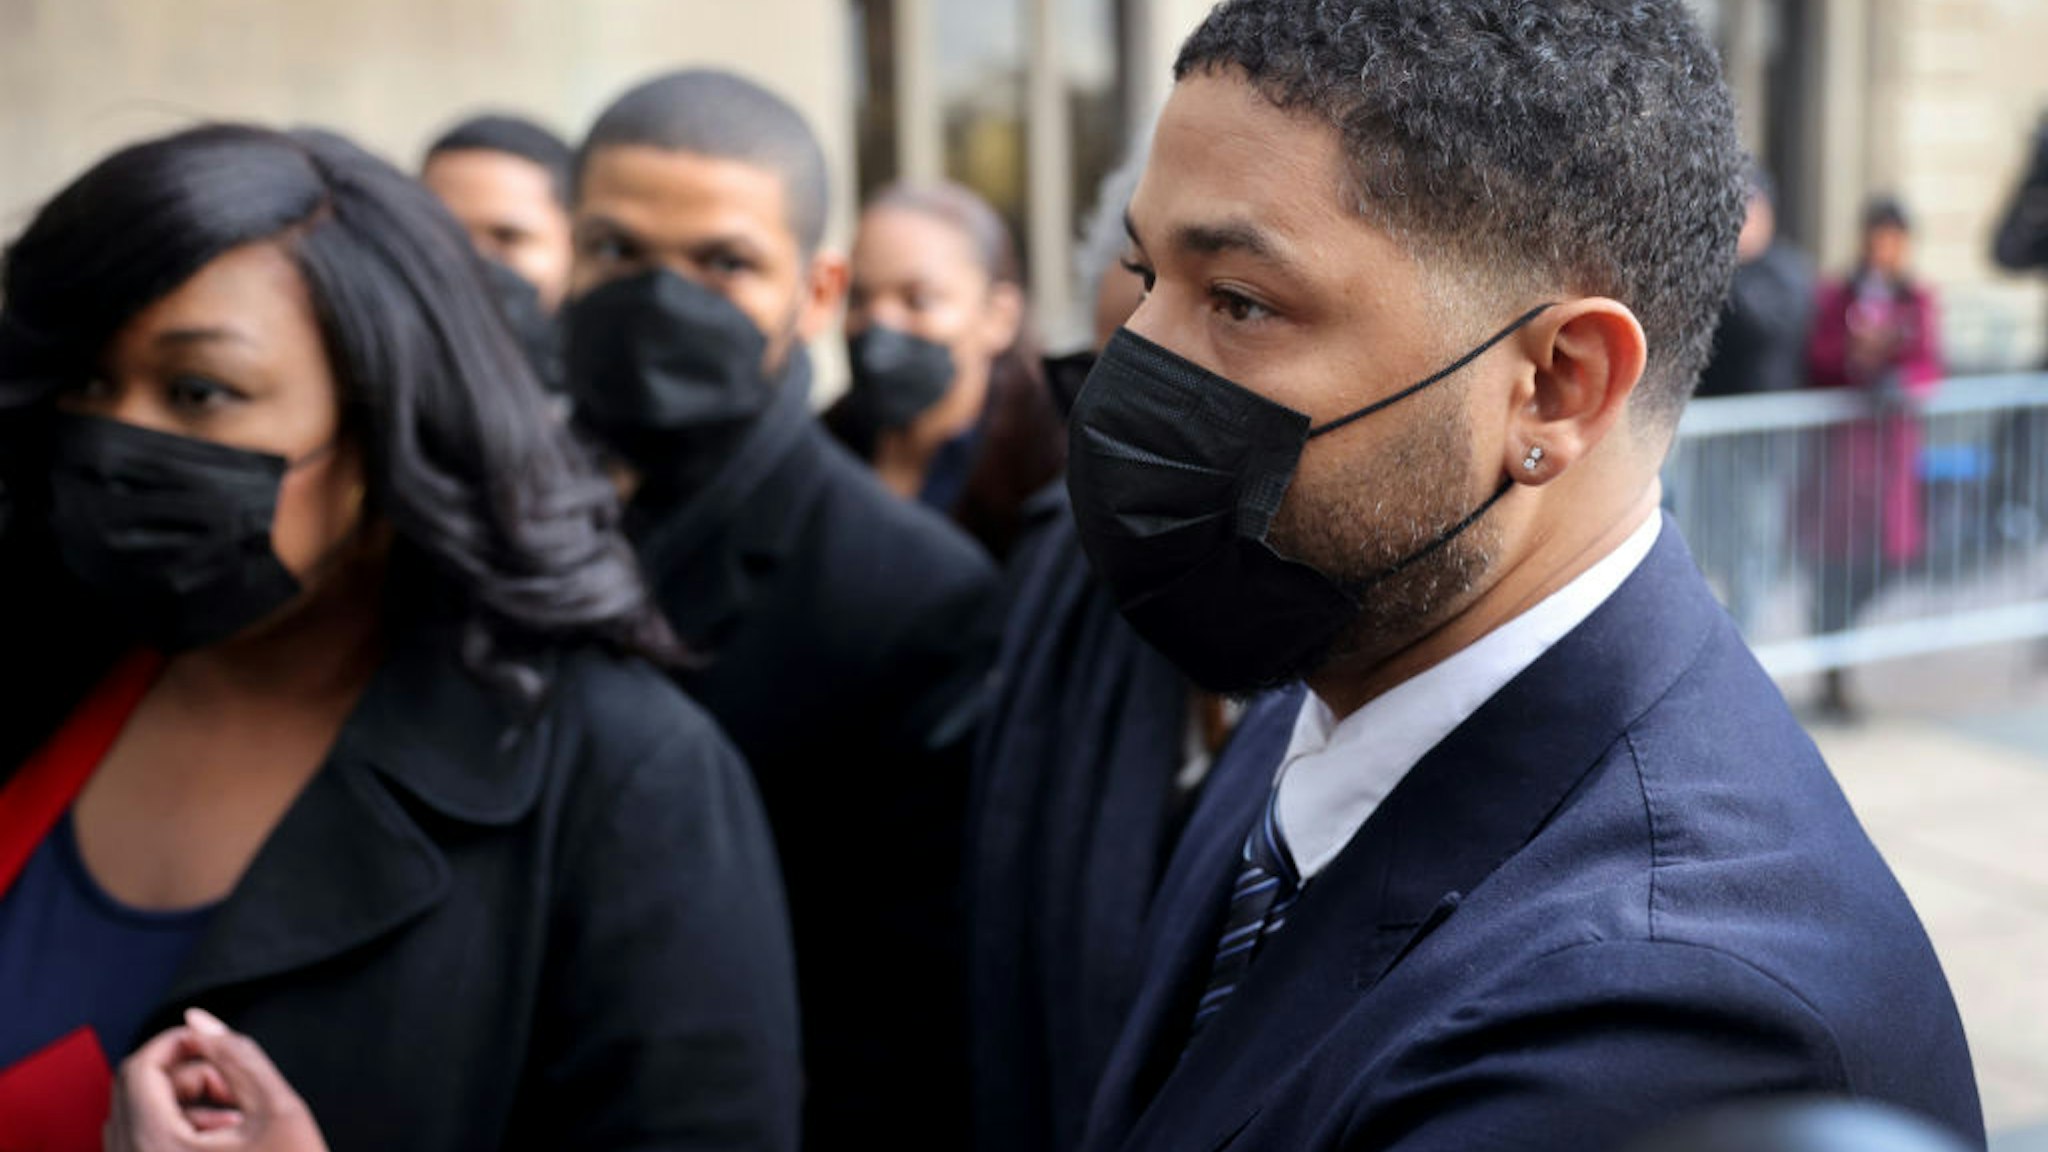 CHICAGO, ILLINOIS - NOVEMBER 29: Former "Empire" actor Jussie Smollett arrives at the Leighton Courts Building for the start of jury selection in his trial on November 29, 2021 in Chicago, Illinois. Smollett is accused of lying to police when he reported that two masked men physically and verbally attacked him, yelling racist and anti-gay remarks near his Chicago home in 2019. (Photo by Scott Olson/Getty Images)